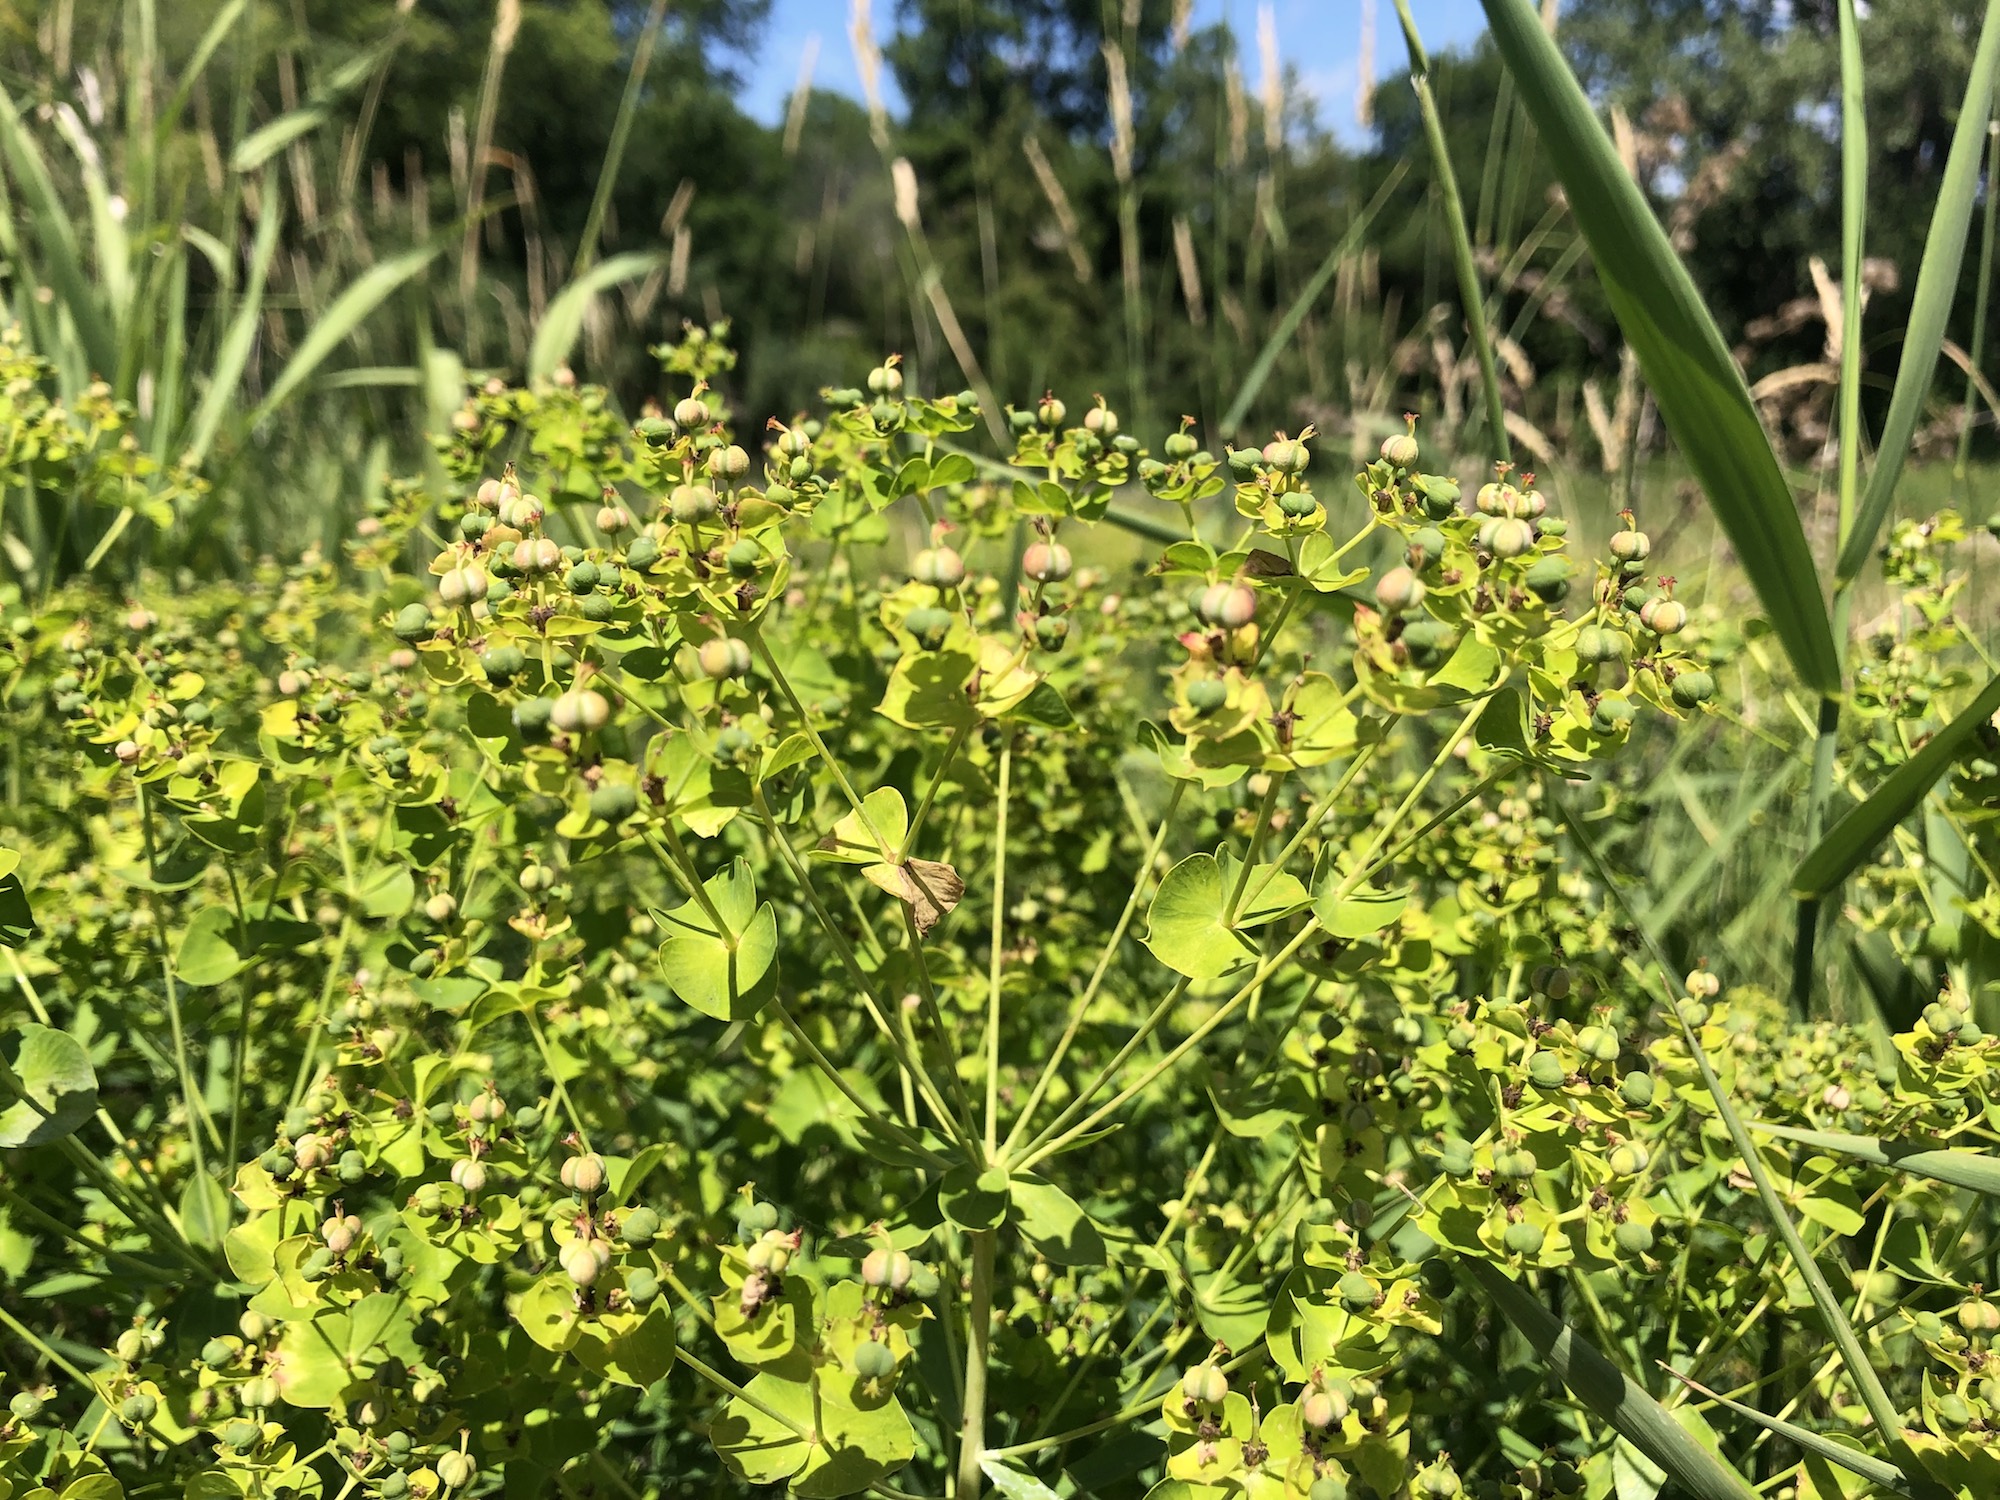 Leafy Spurge near Whitney Way in Madison, Wisconsin on June 22, 2021.